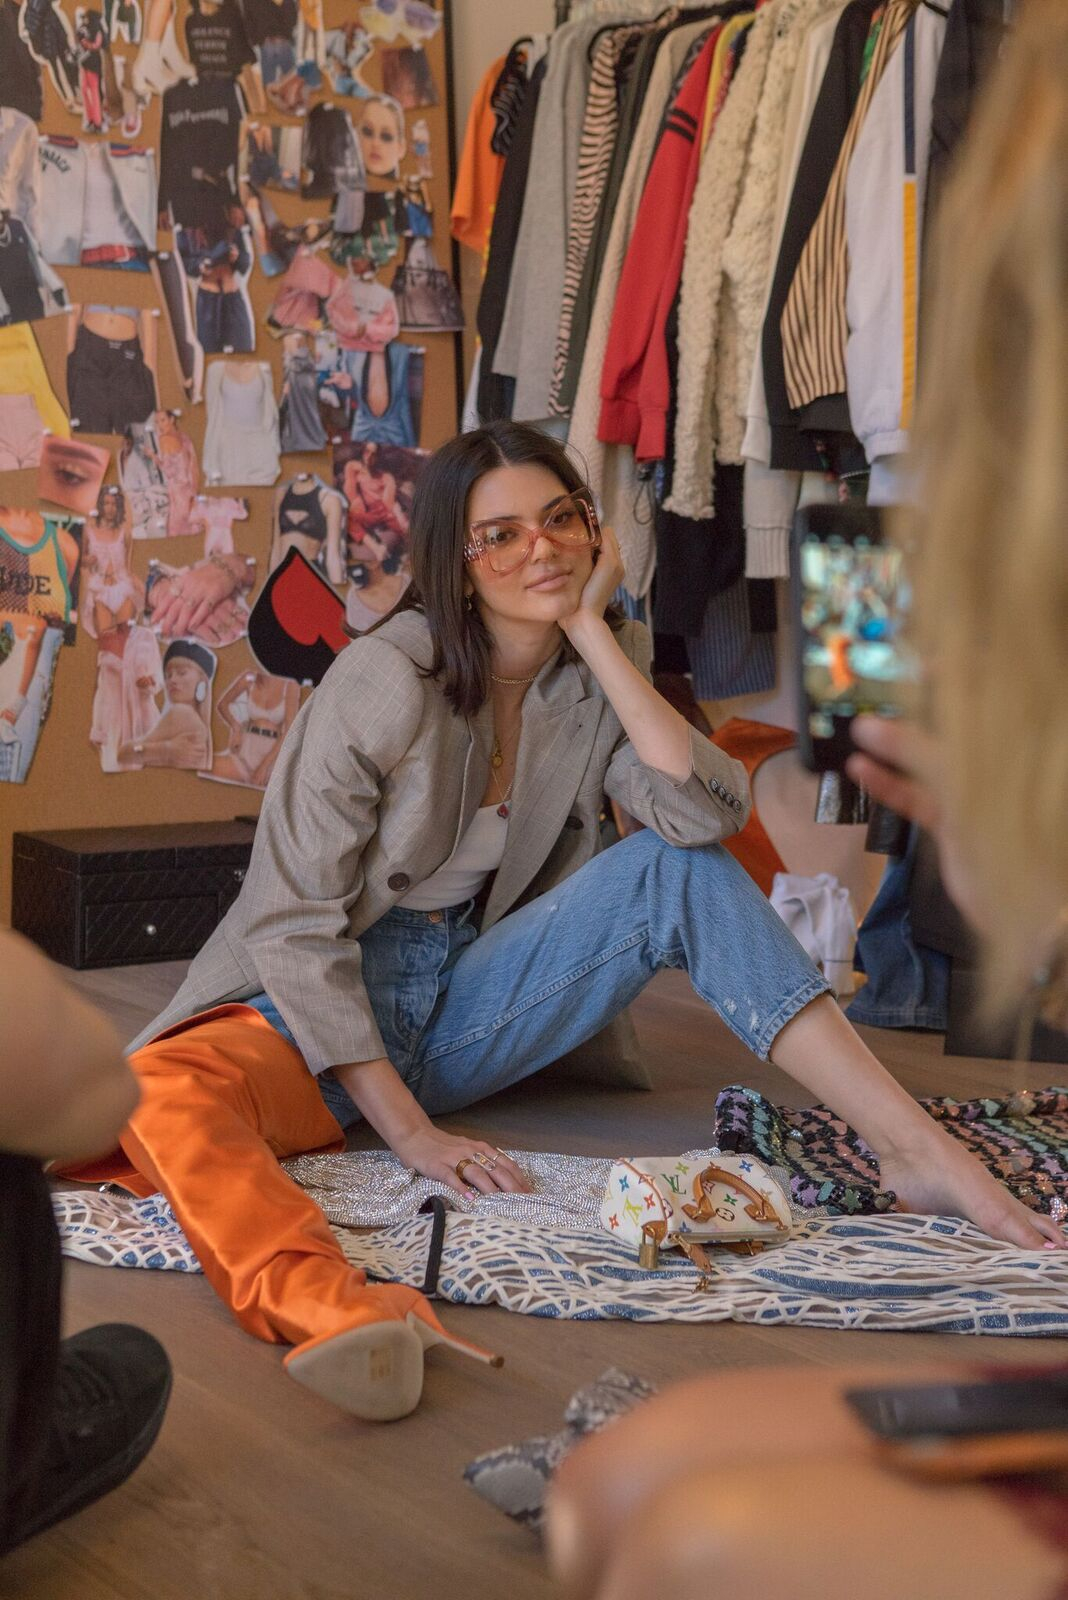 These Pictures of Kendall Jenner's Closet Are Giving Me Anxiety